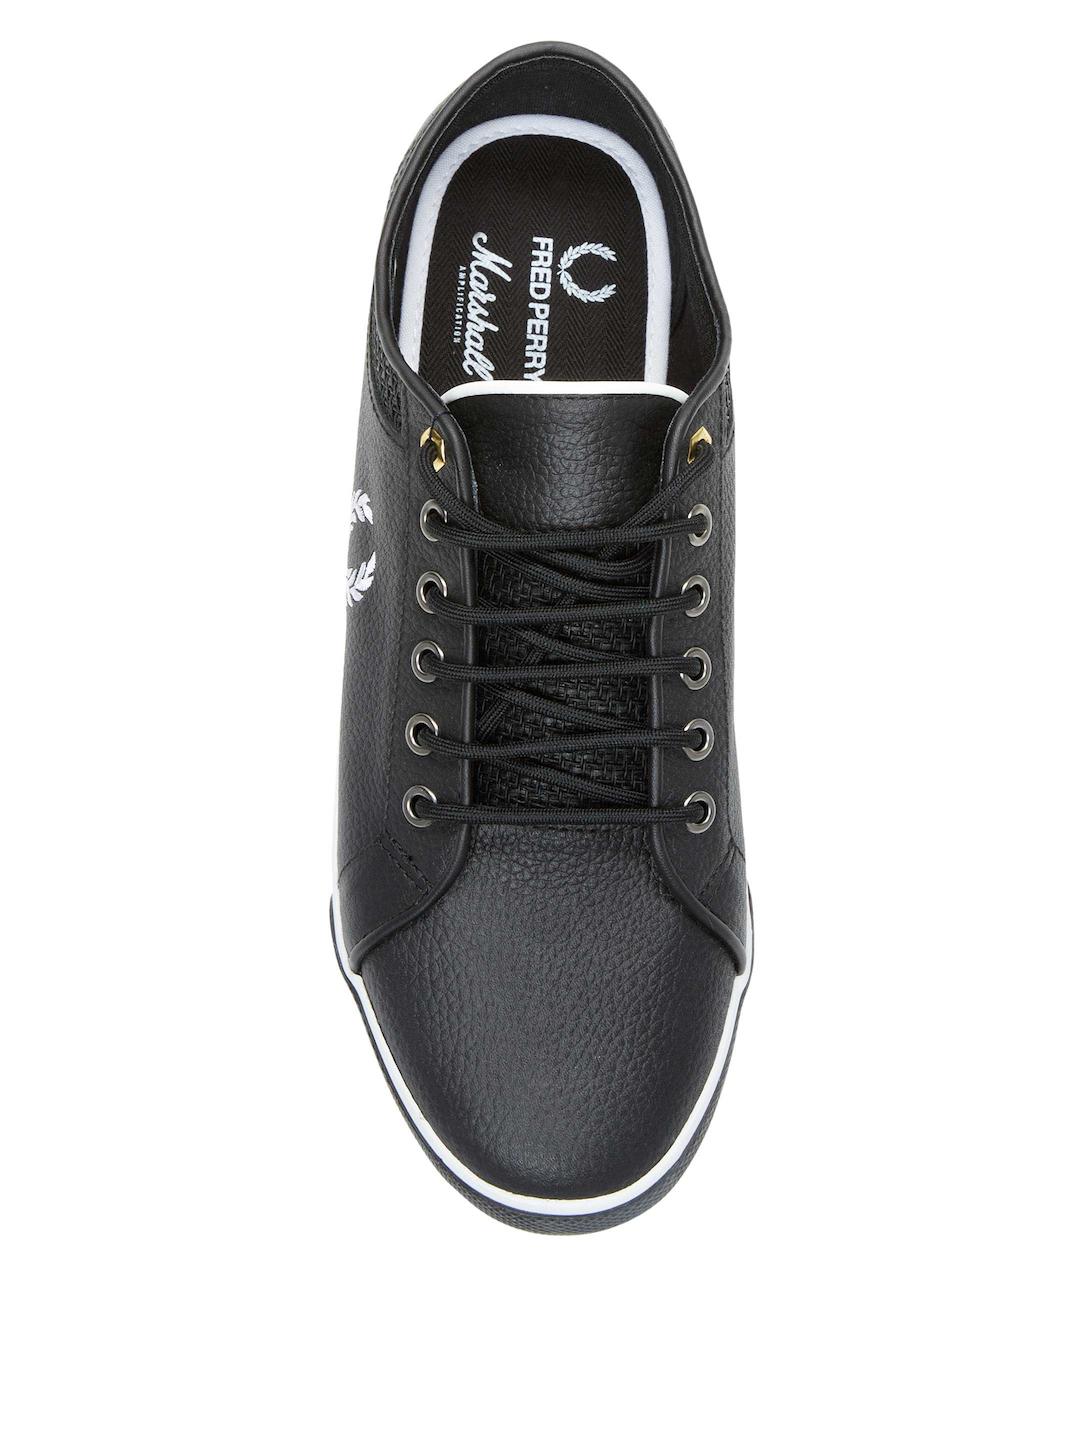 Fred Perry Kingston Marshall Sneakers in Black for Men - Lyst